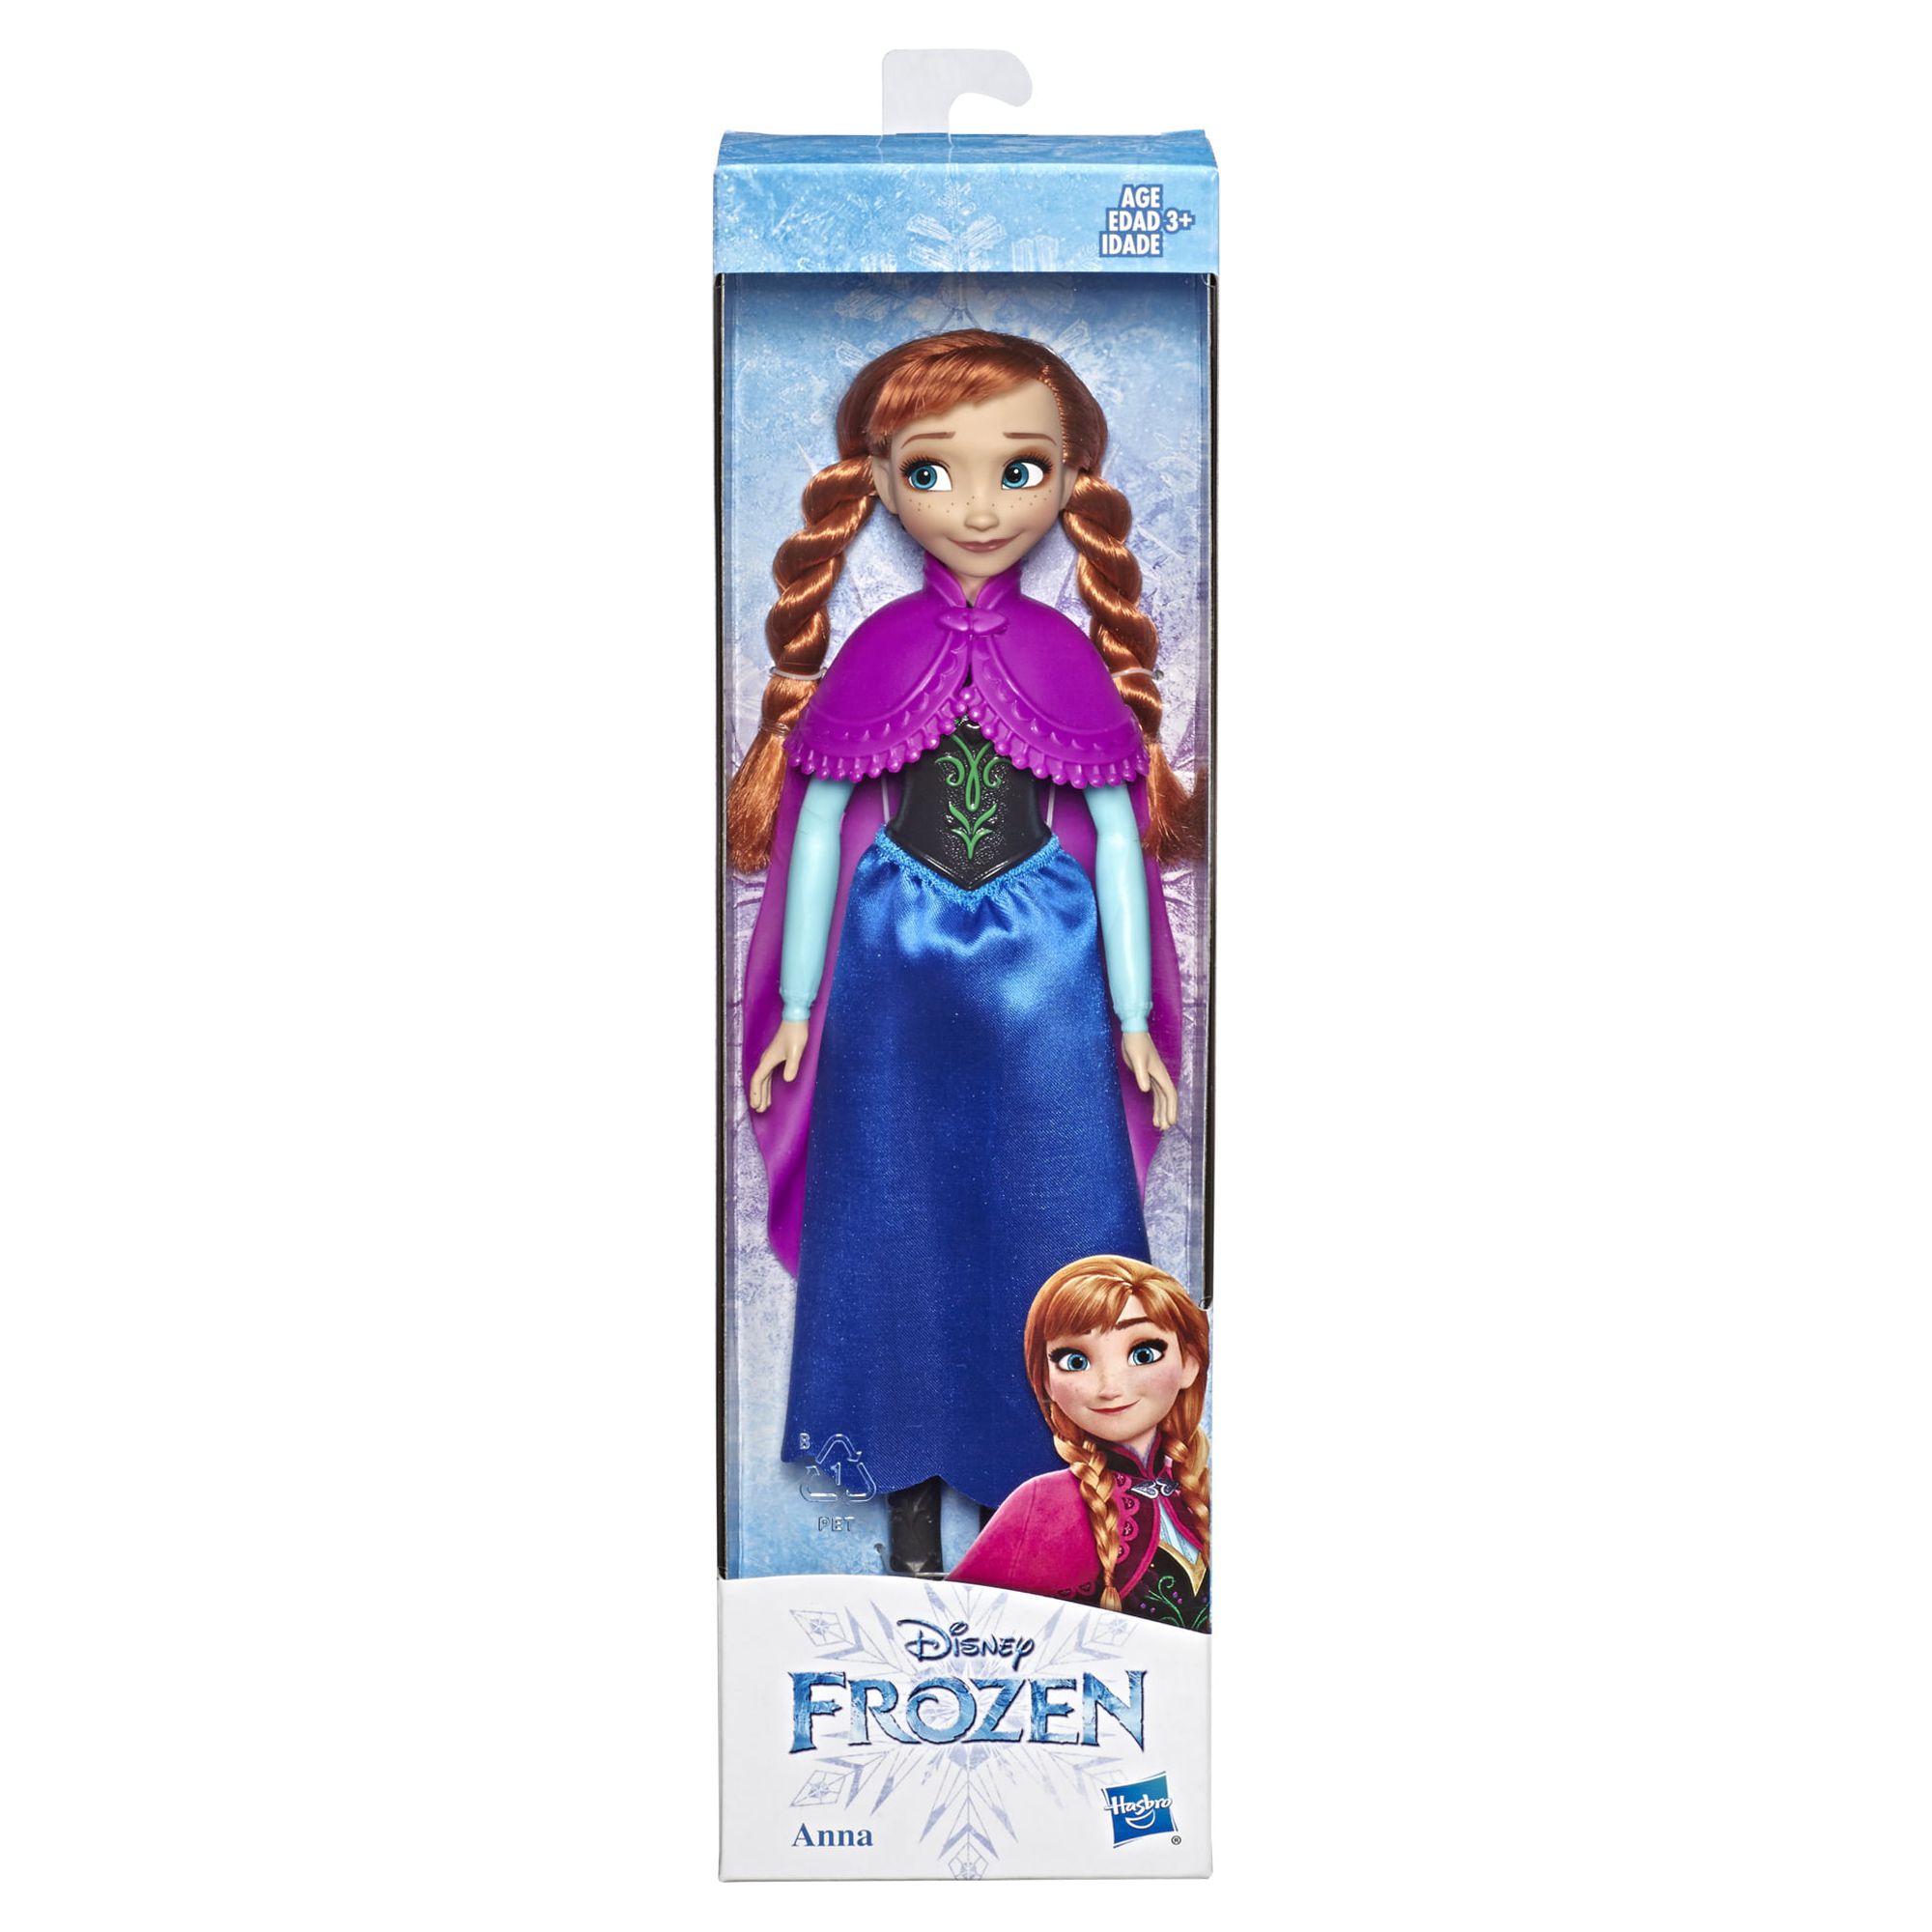 Disney Frozen Anna Fashion Doll with Movie-Inspired Outfit from Frozen - image 2 of 2